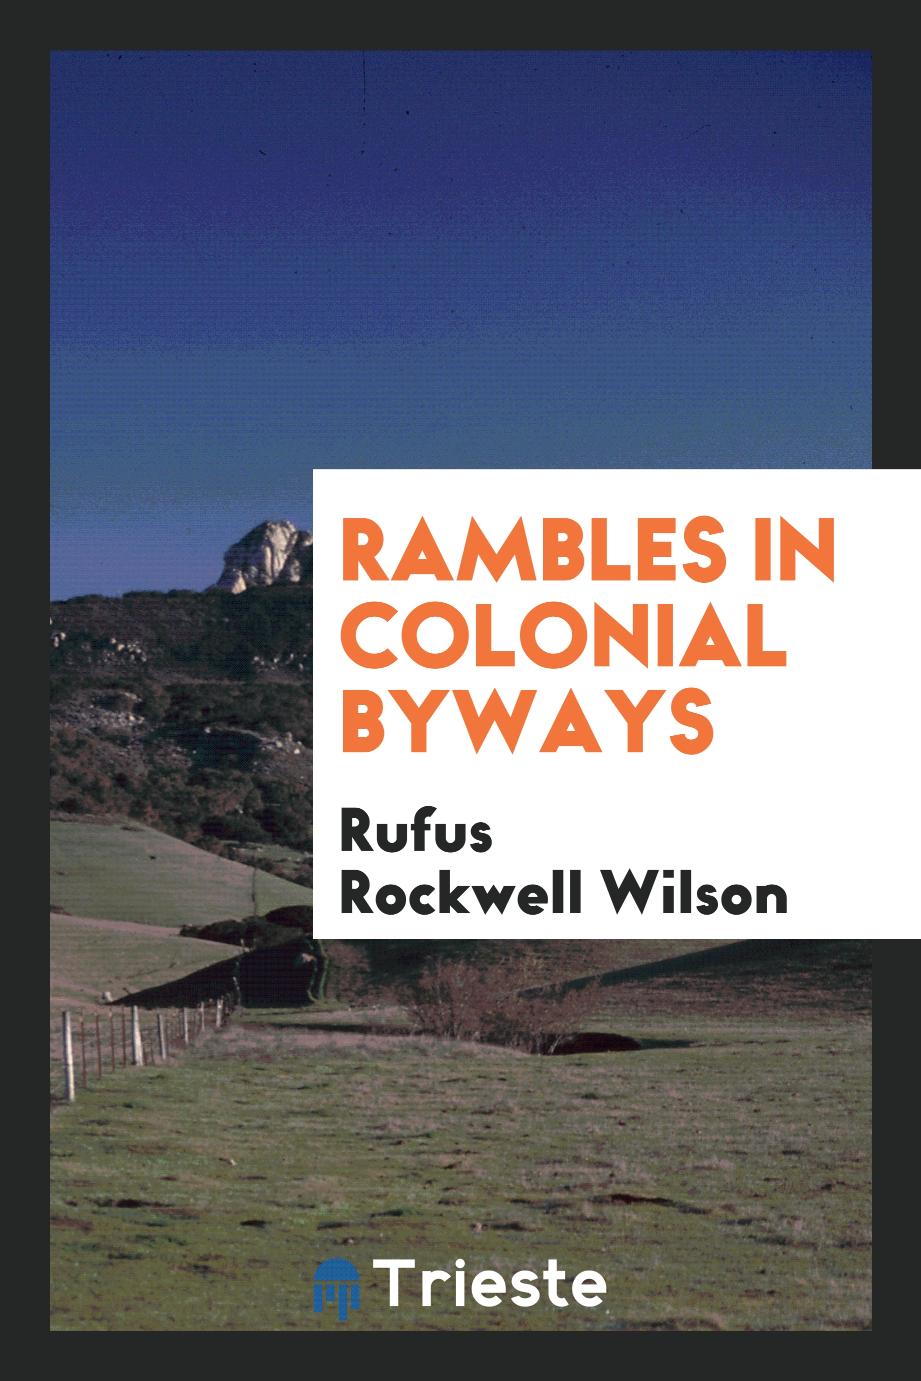 Rambles in colonial byways